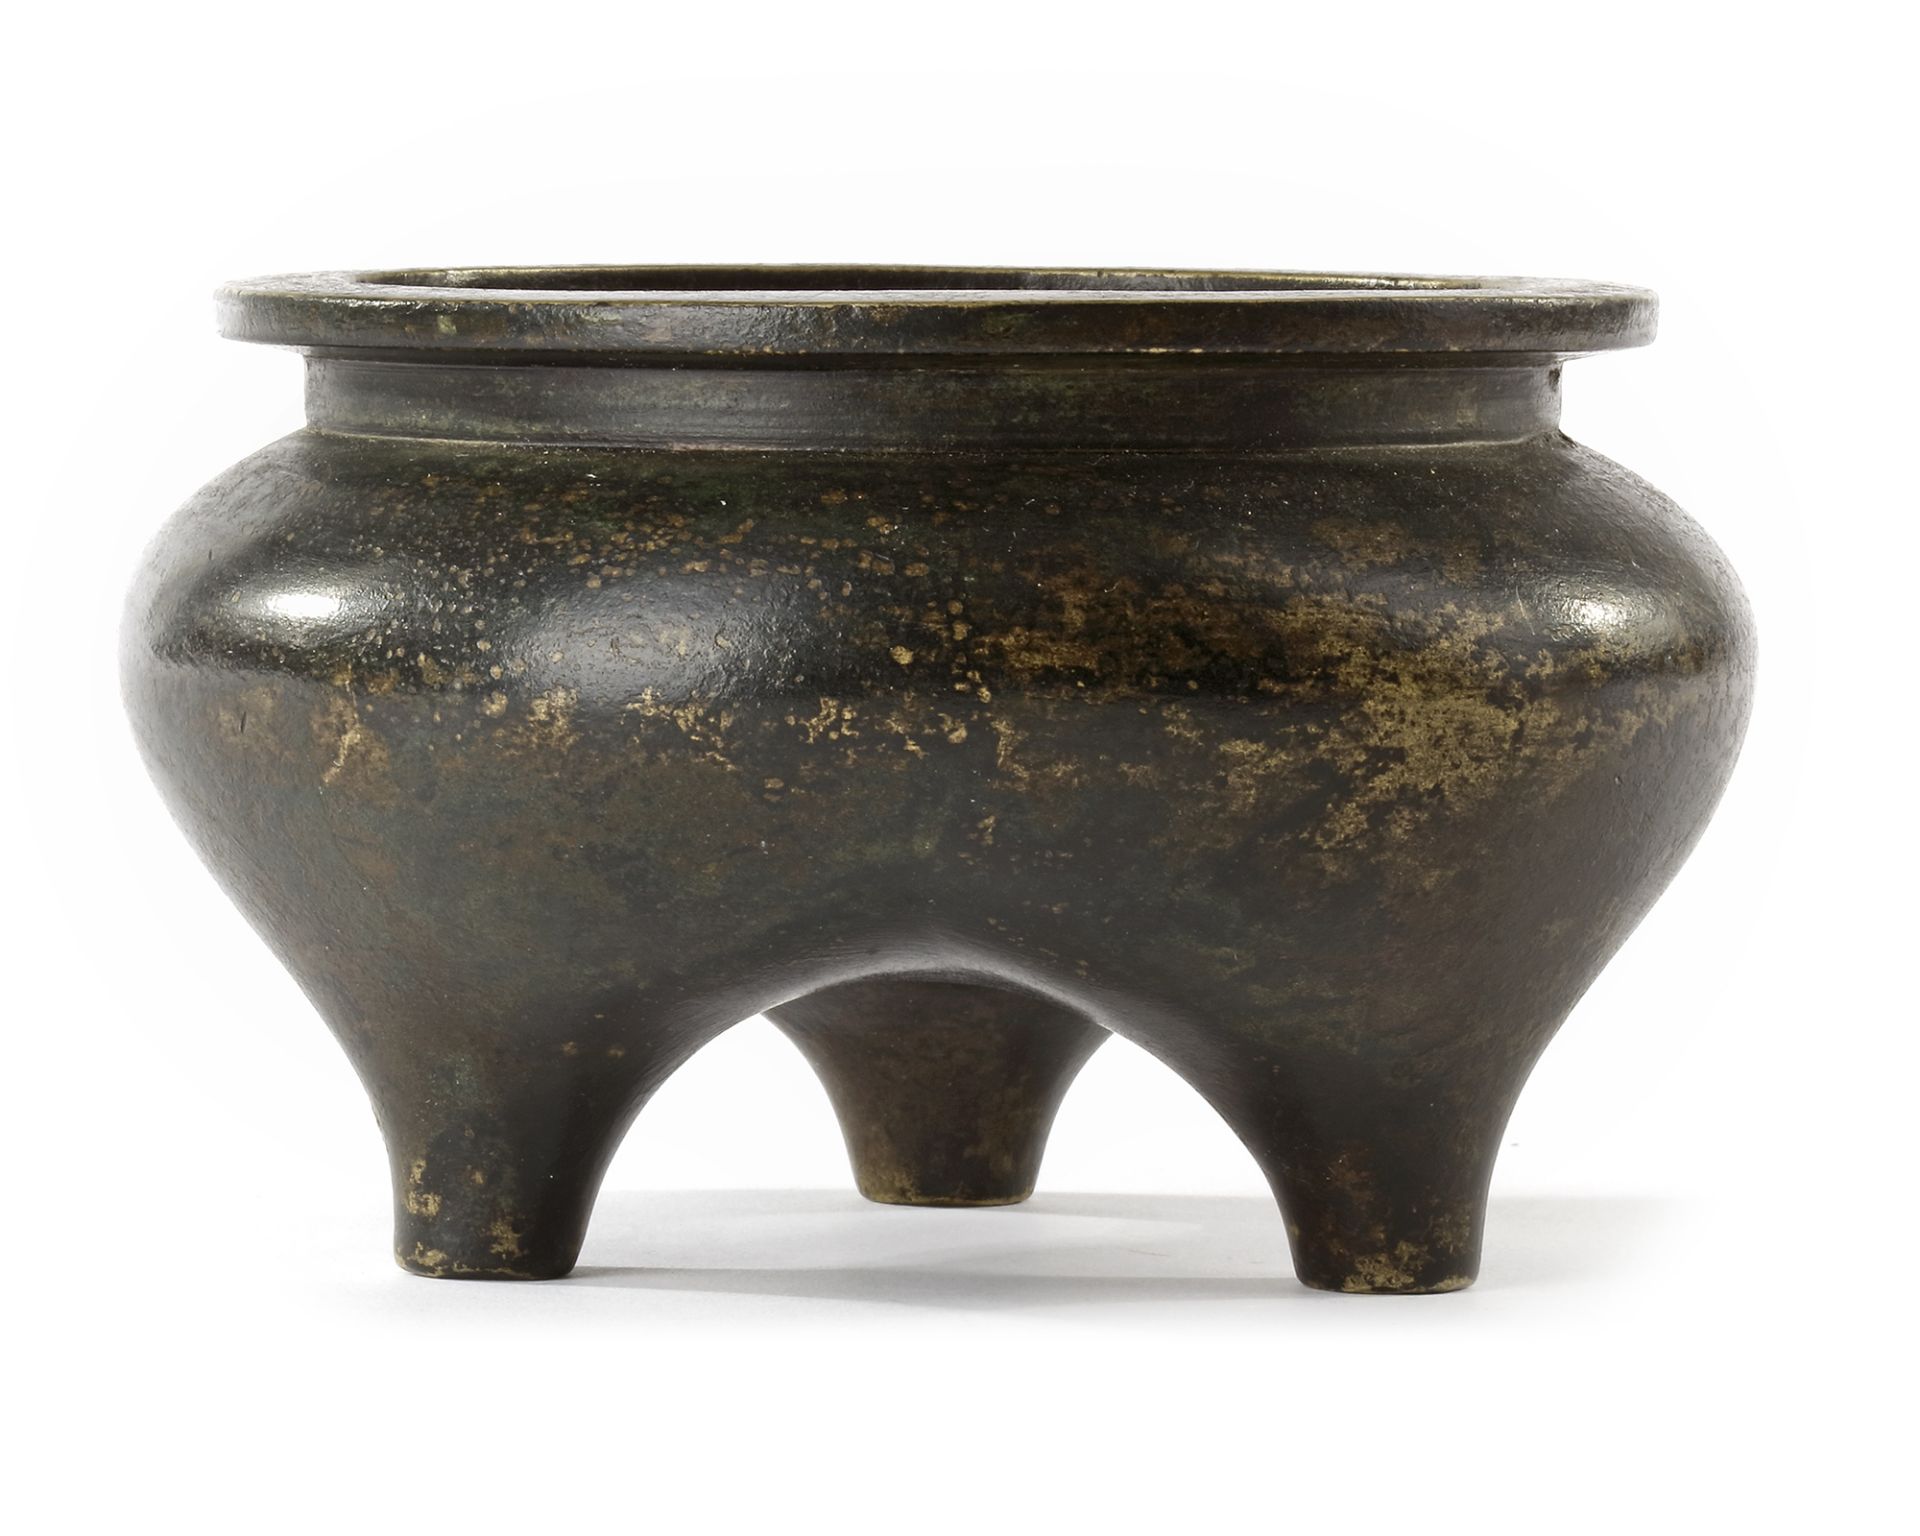 A BRONZE TRIPOD INCENSE BURNER, QING DYNASTY (1644–1911) 17TH/18TH CENTURY - Image 2 of 8